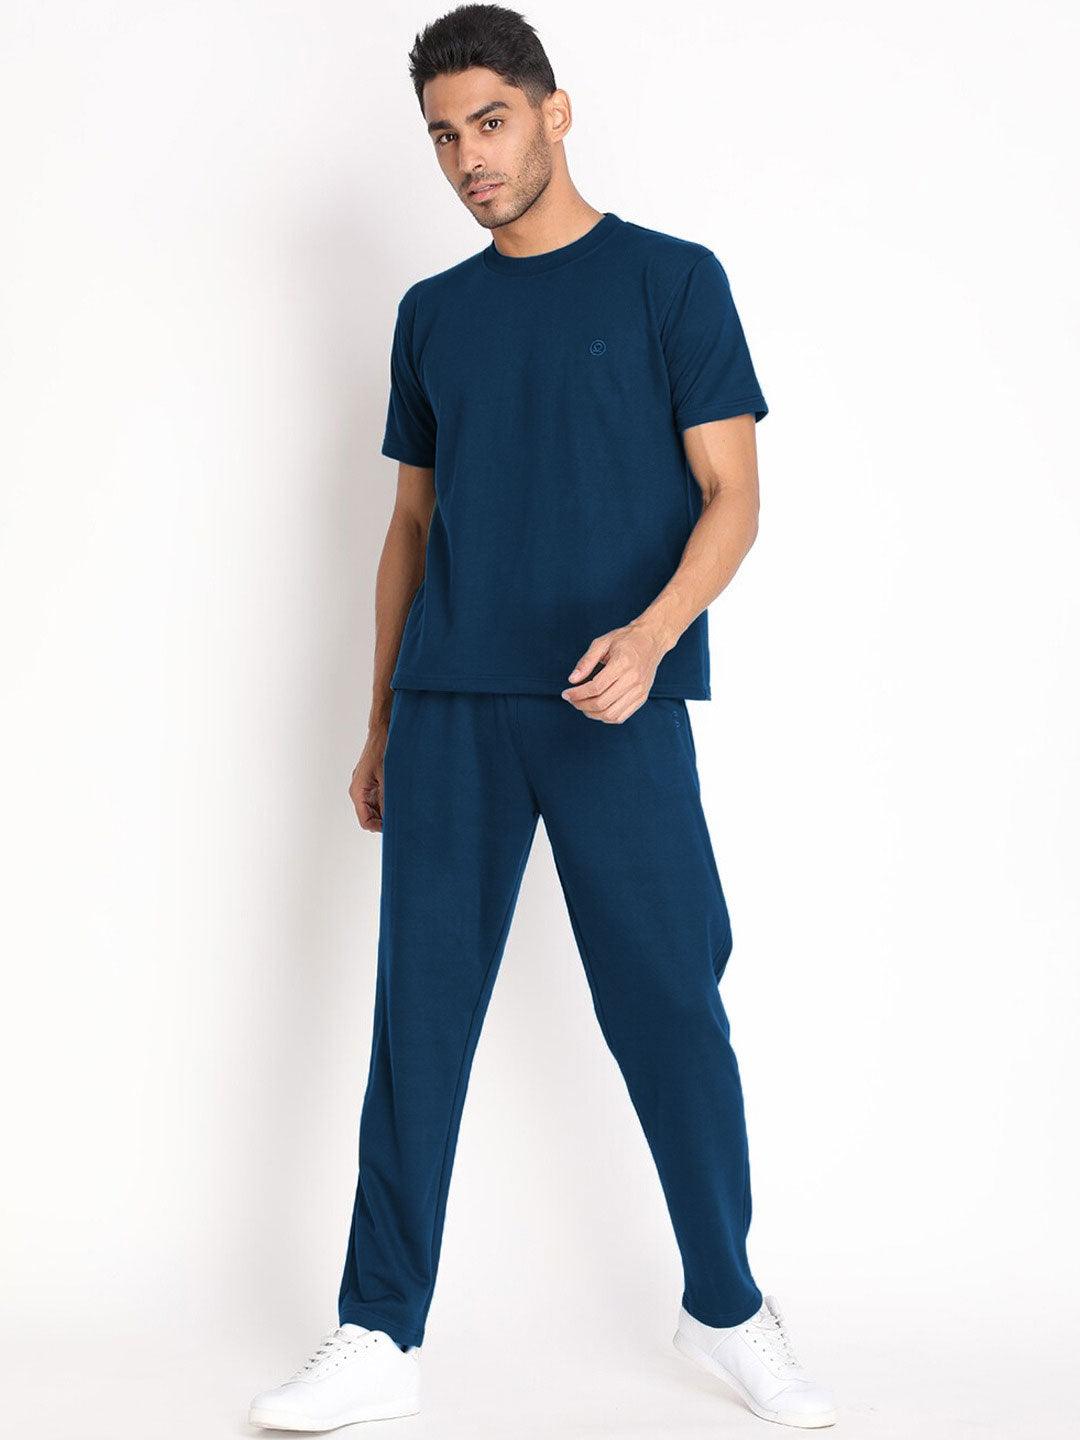 Mens Full Track Suits in Nevy Blue Colour - Aadhitri